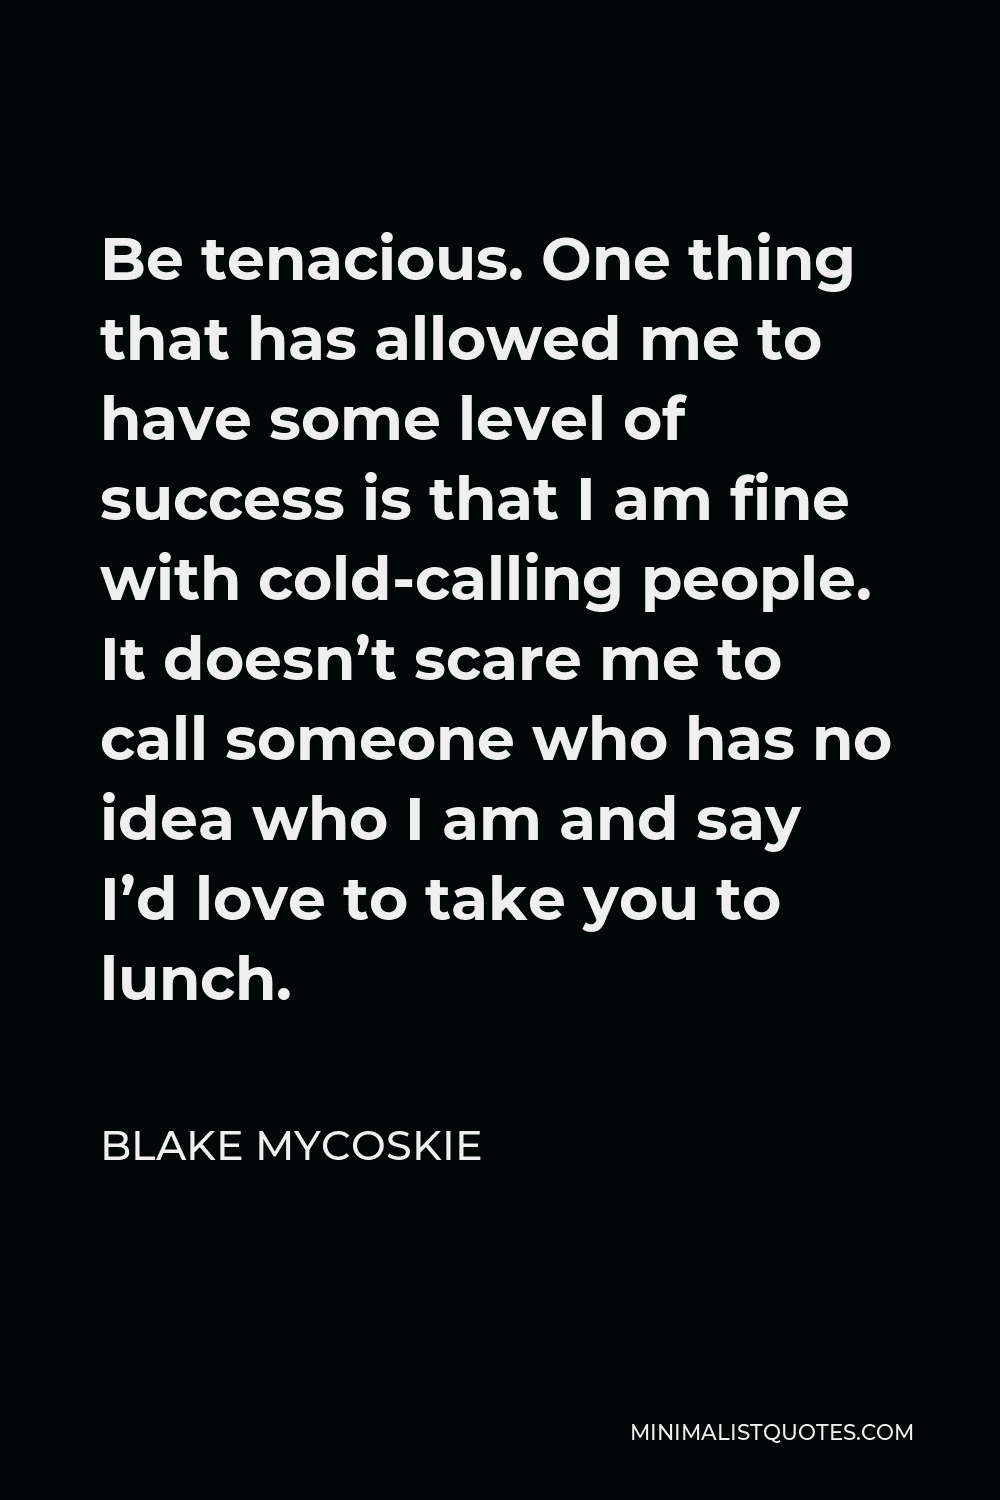 Blake Mycoskie Quote - Be tenacious. One thing that has allowed me to have some level of success is that I am fine with cold-calling people. It doesn’t scare me to call someone who has no idea who I am and say I’d love to take you to lunch.